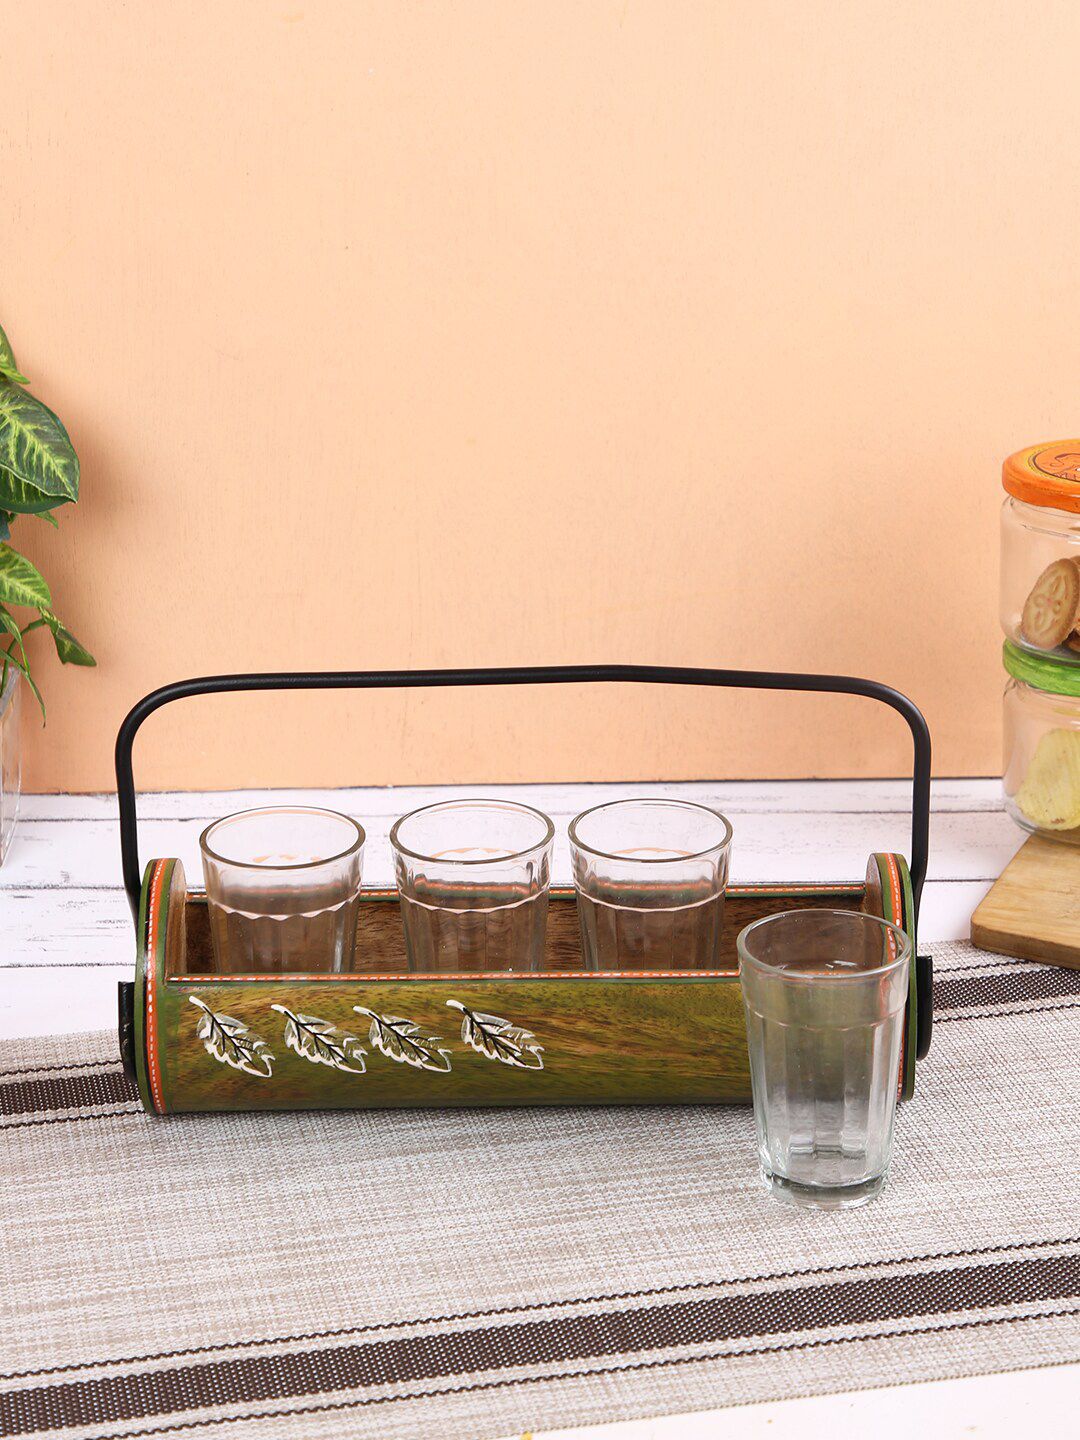 Aapno Rajasthan Set Of 3 Handcrafted Glasses With Wooden Tray Price in India